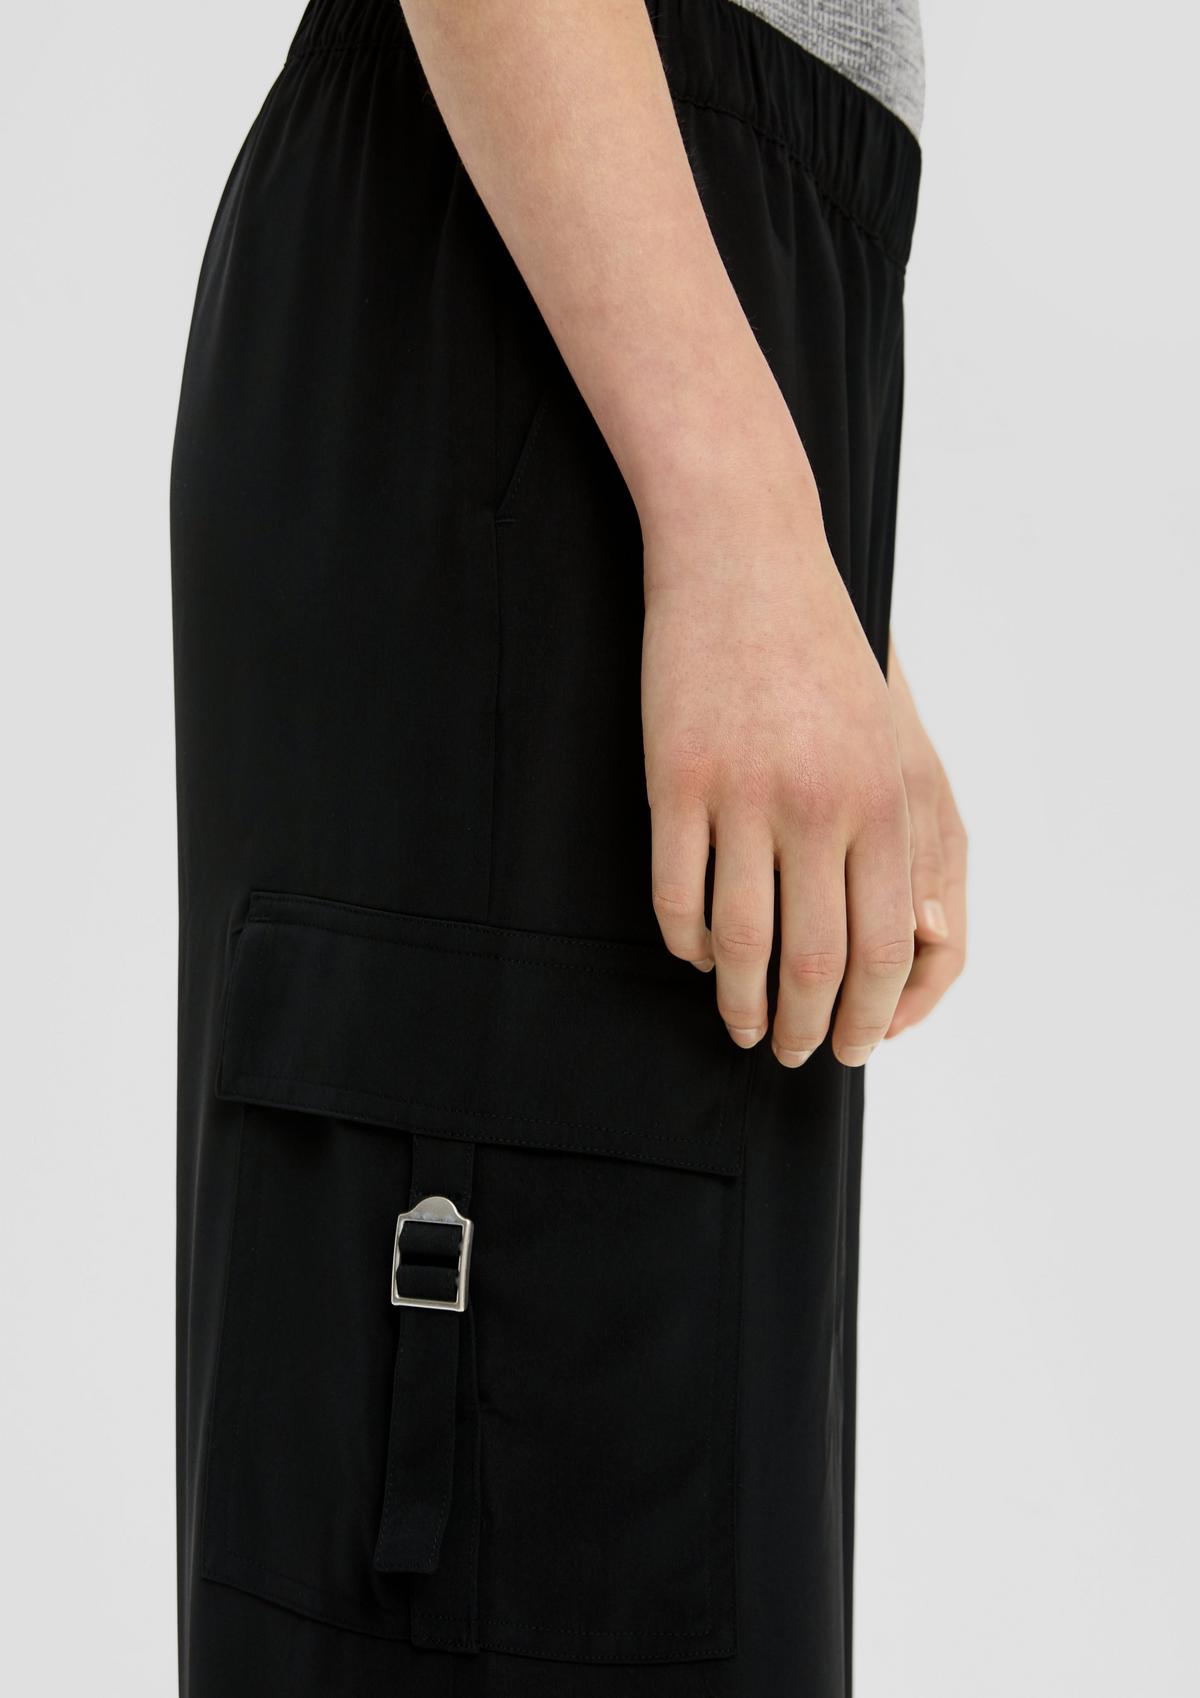 s.Oliver Satin trousers with a wide leg and cargo pockets